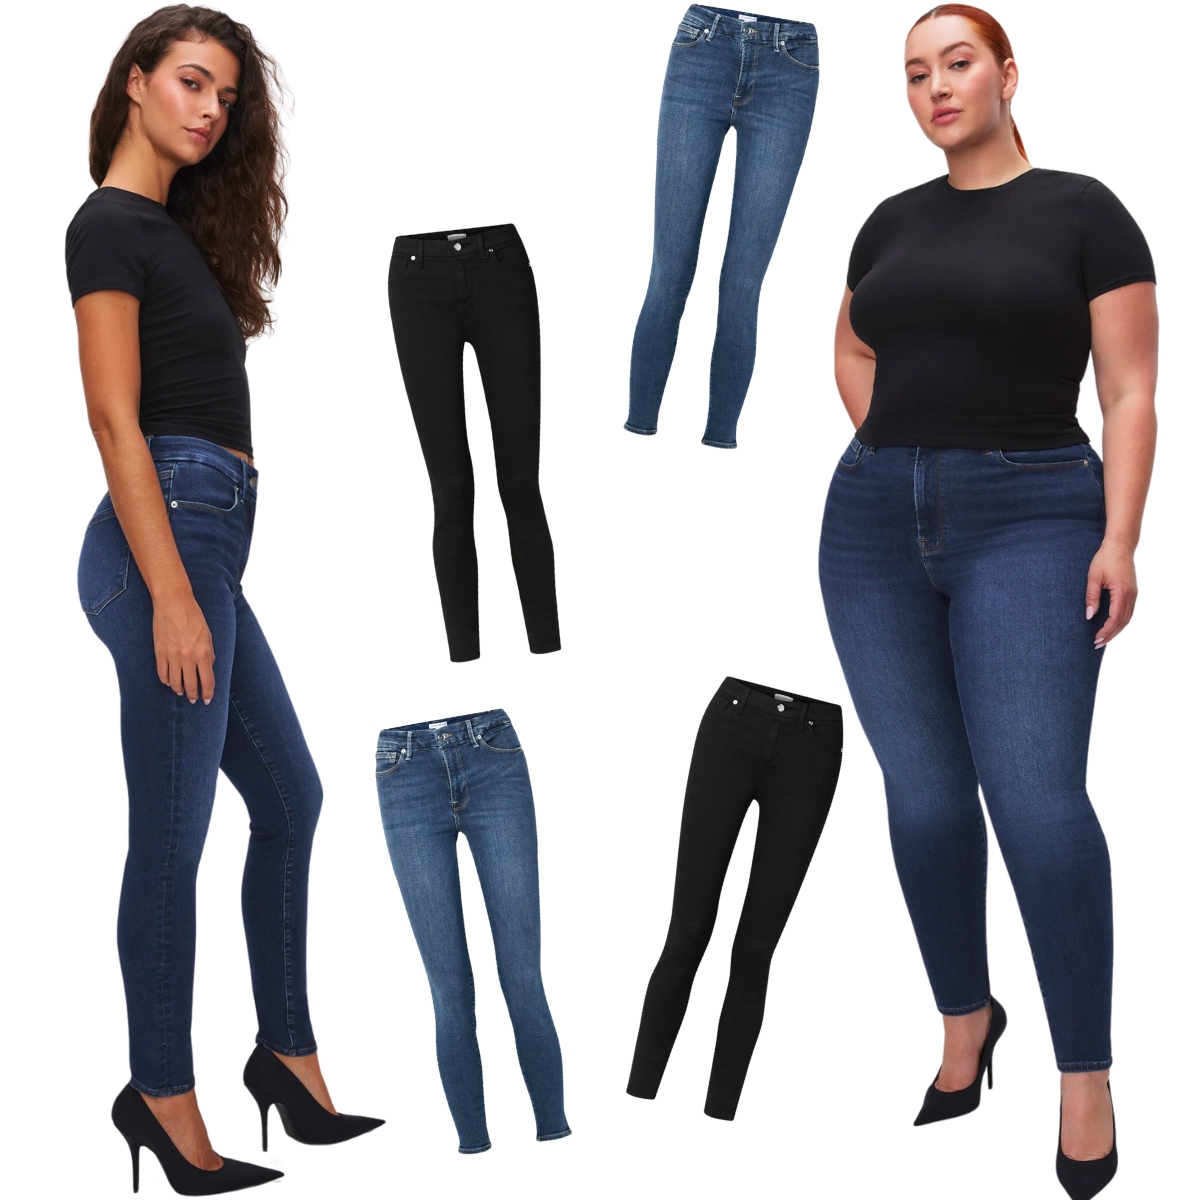 Save 56% On the Magical Good American Jeans That Still Fit Me After 30  Pounds of Weight Fluctuation